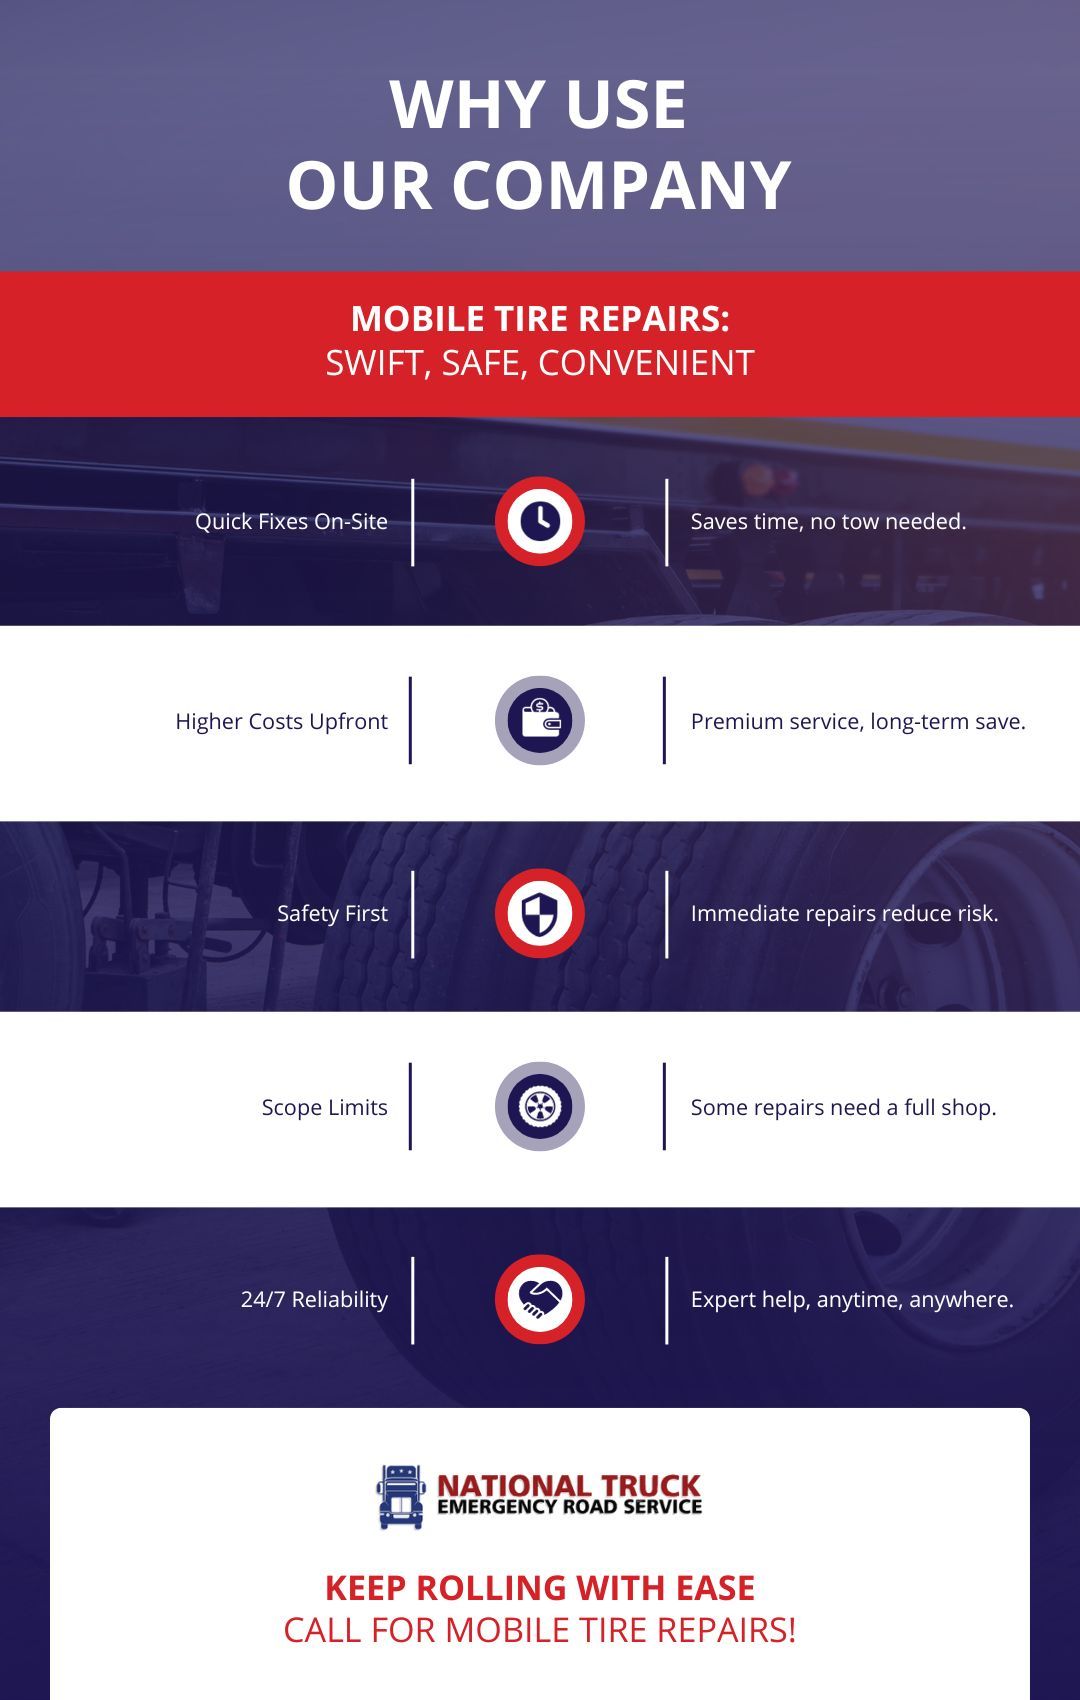 M12039 - Infographic - The Pros and Cons of Mobile Tire Repair Services for Commercial Trucks.jpg